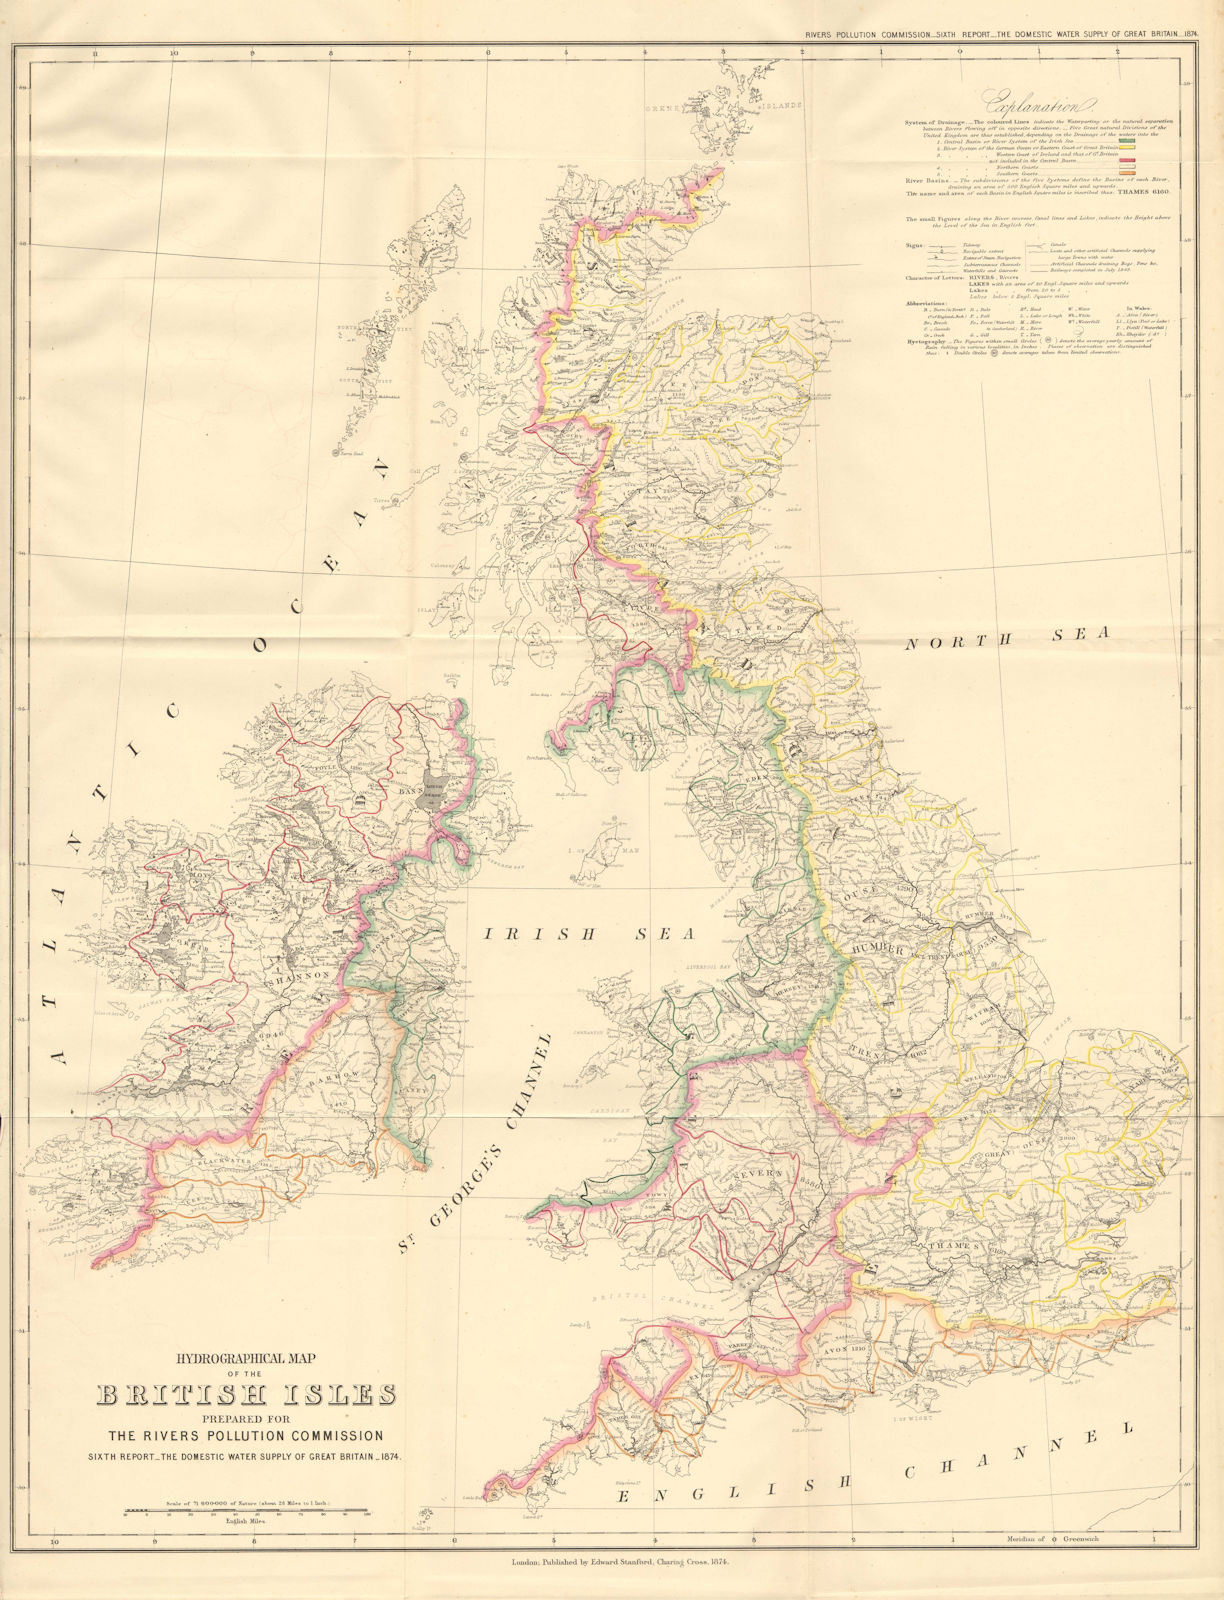 British Isles Hydrographical map. Drainage basins/watersheds. STANFORD 1874